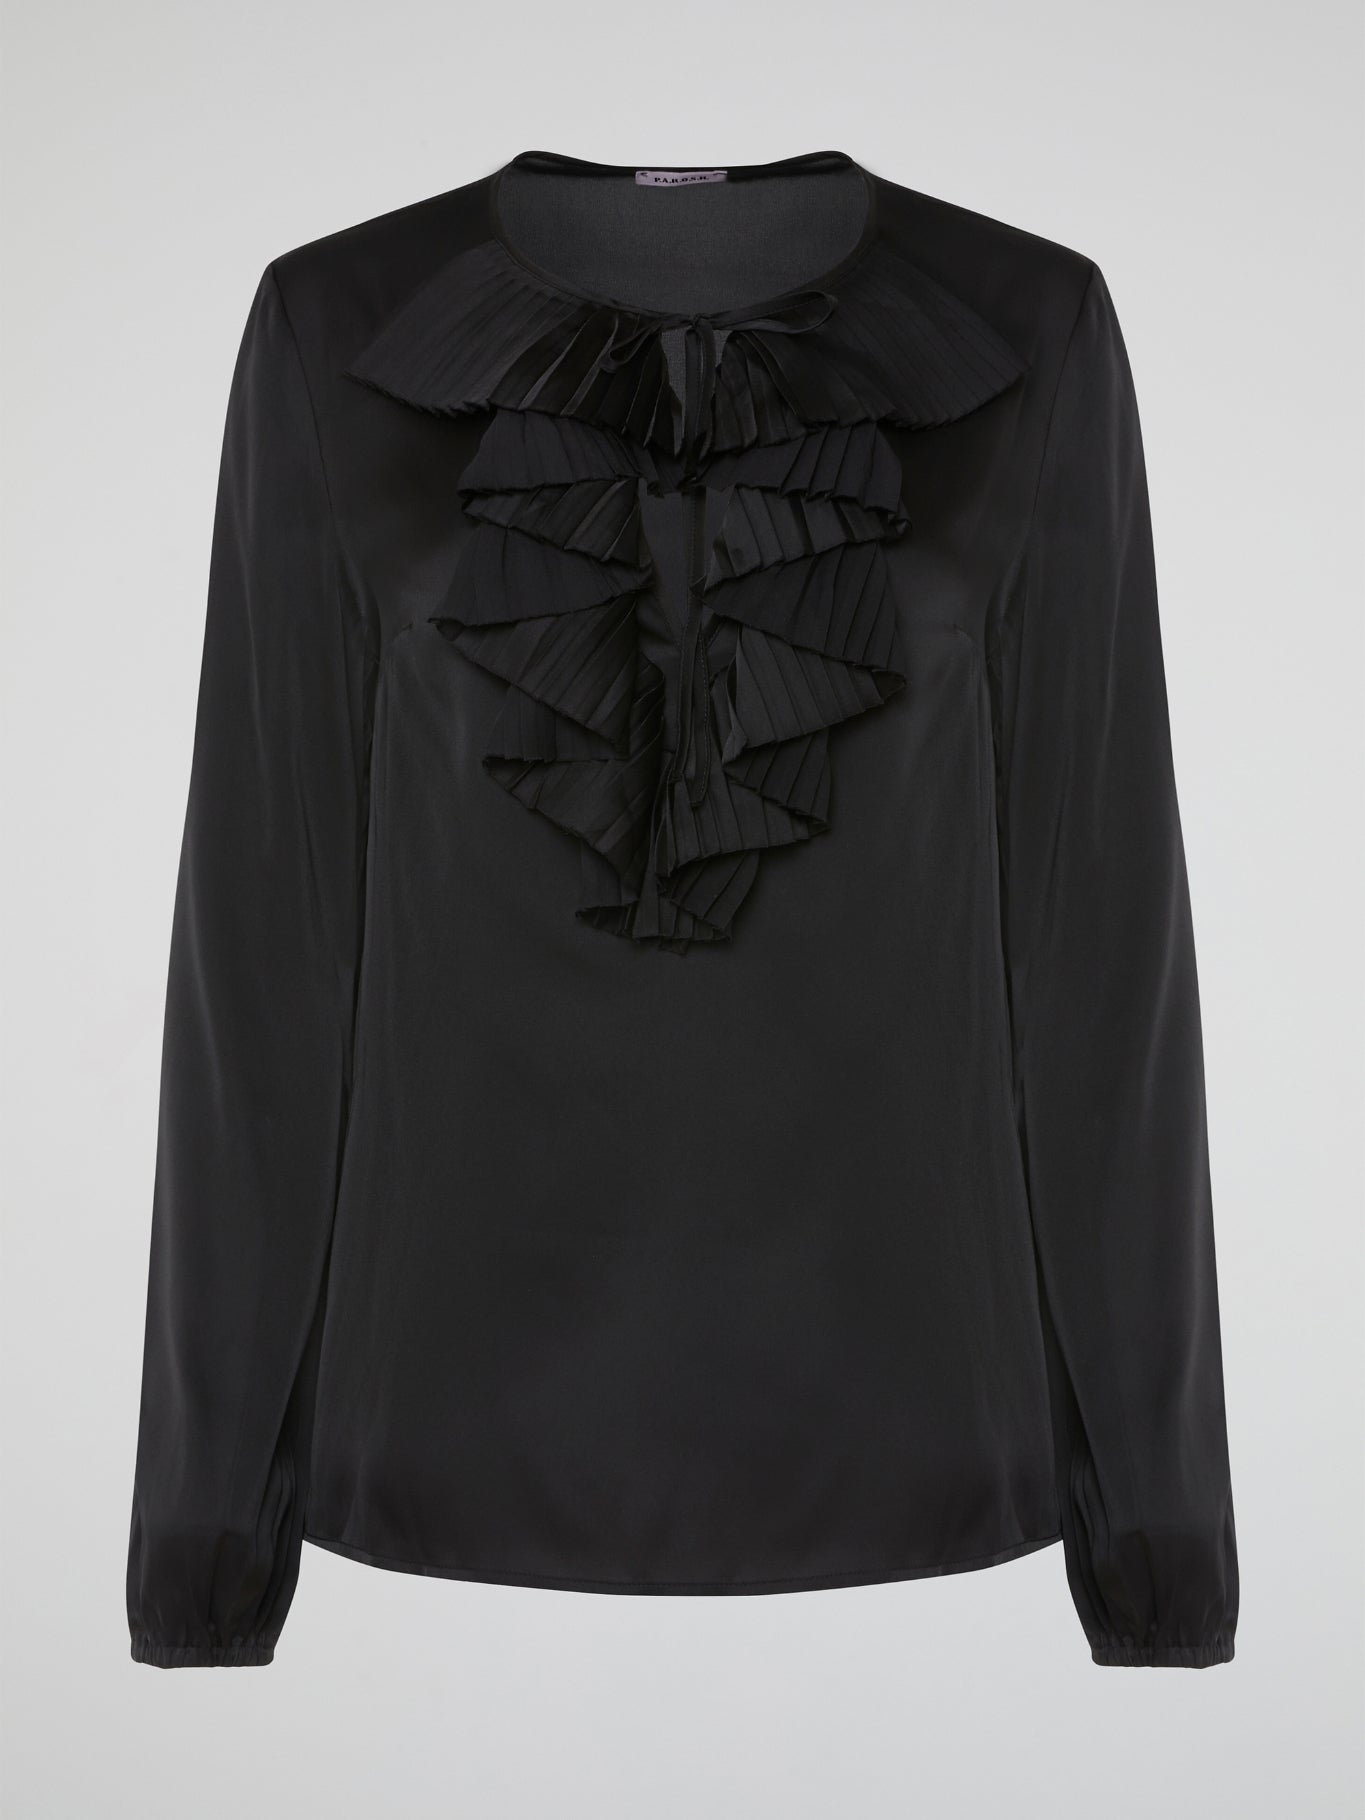 Introducing the Black Ruffle Bib Blouse by Parosh, where timeless elegance meets playful charm. Crafted with utmost precision, this statement piece features a beautifully sculpted ruffle bib that adds a touch of whimsy to your ensemble. With its sophisticated black hue and impeccable tailoring, this blouse is a must-have addition to your wardrobe, seamlessly elevating any outfit from day to night.